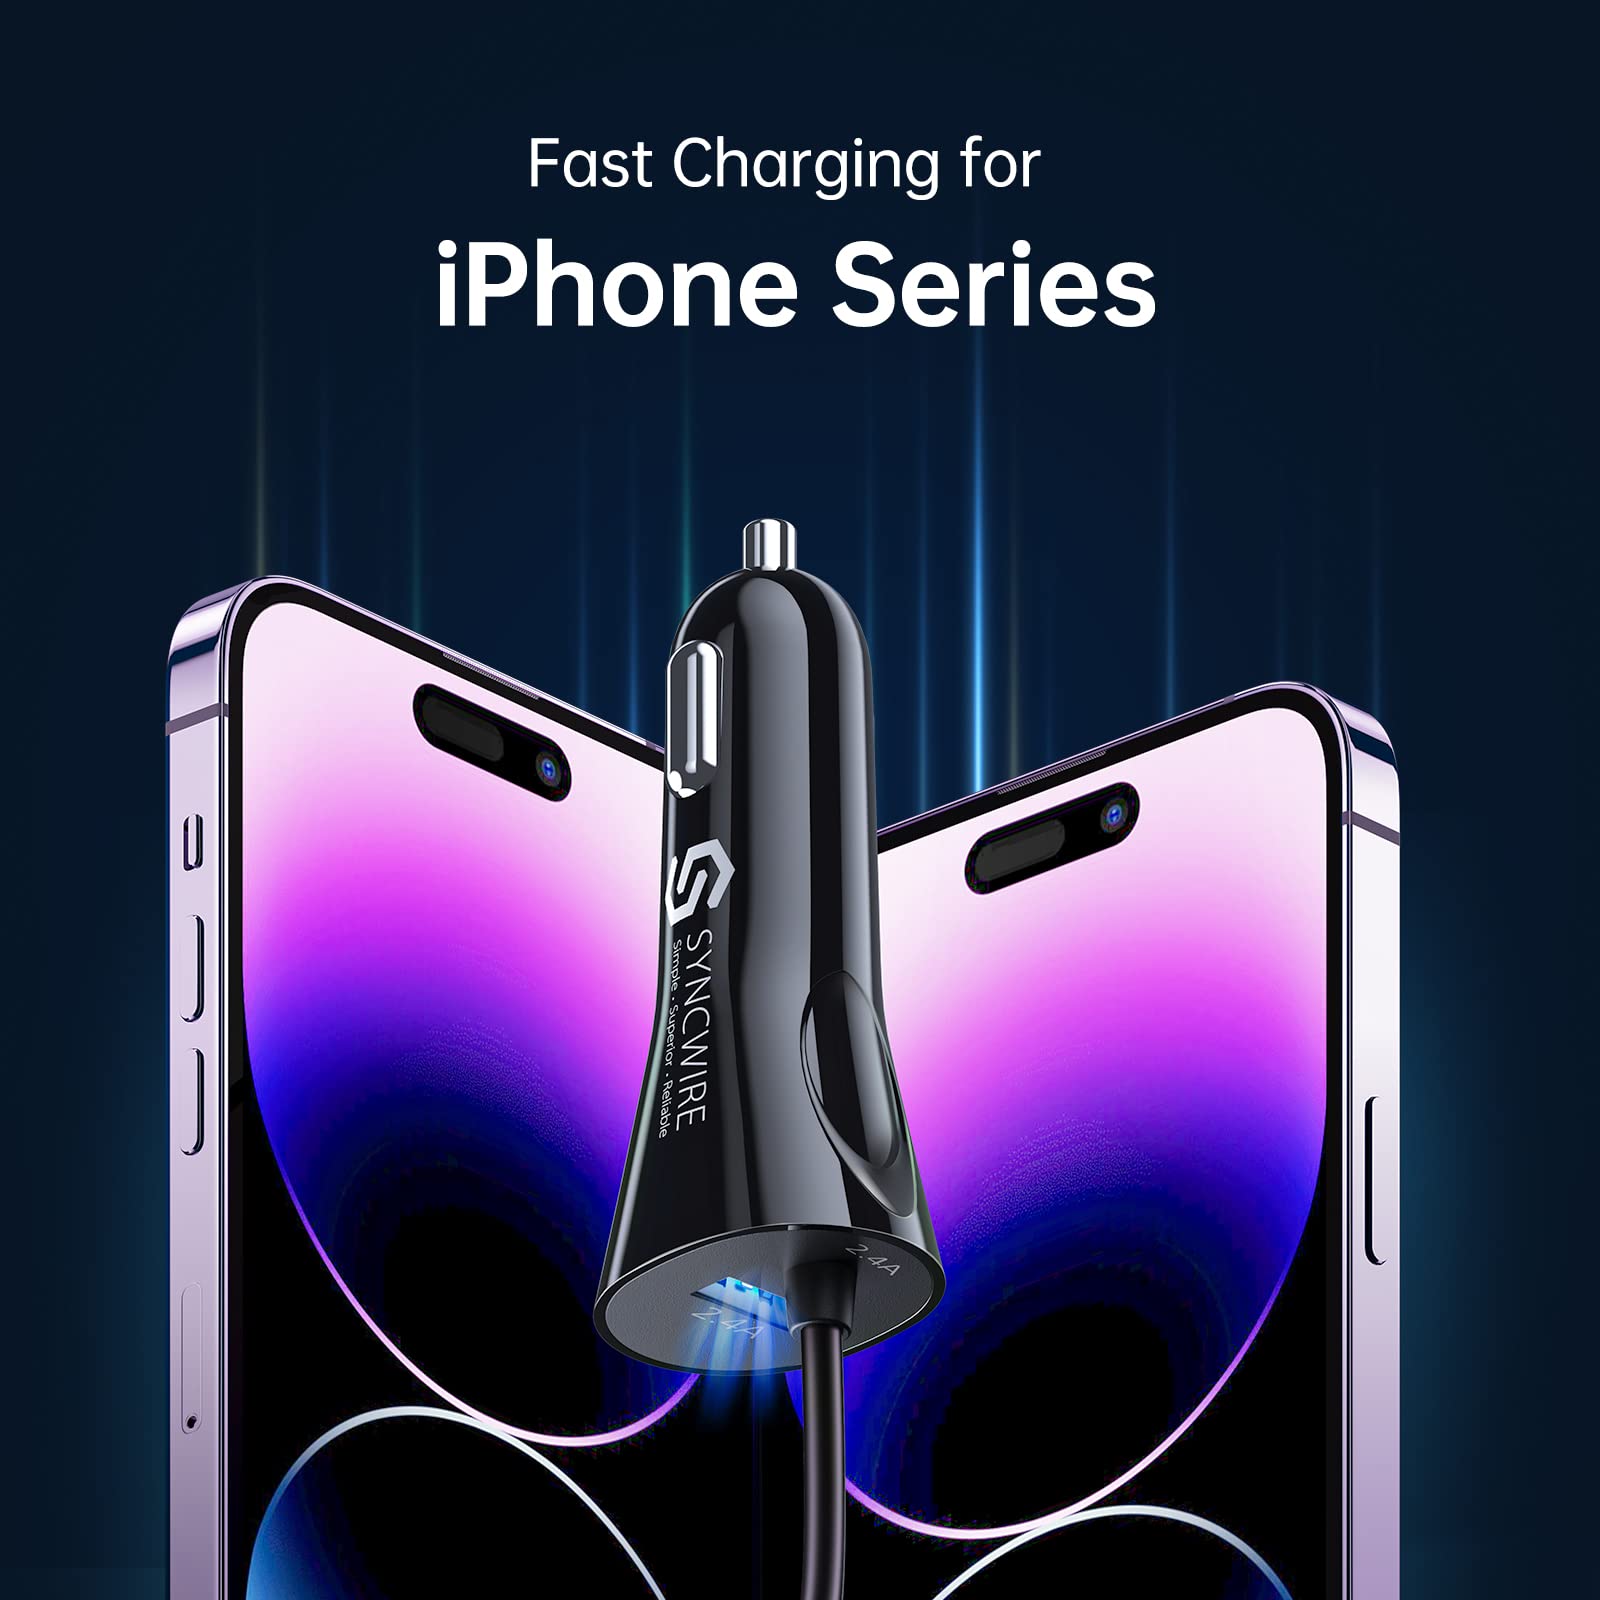 Syncwire iPhone Car Charger - Upgrade [Apple MFi Certified] 4.8A/24W Car Charging Adapter with Built-in Coiled Lightning Cable for Apple iPhone 14/13/12/11/Xs/XS Max/XR/X/8/7/6 Plus, iPad & More